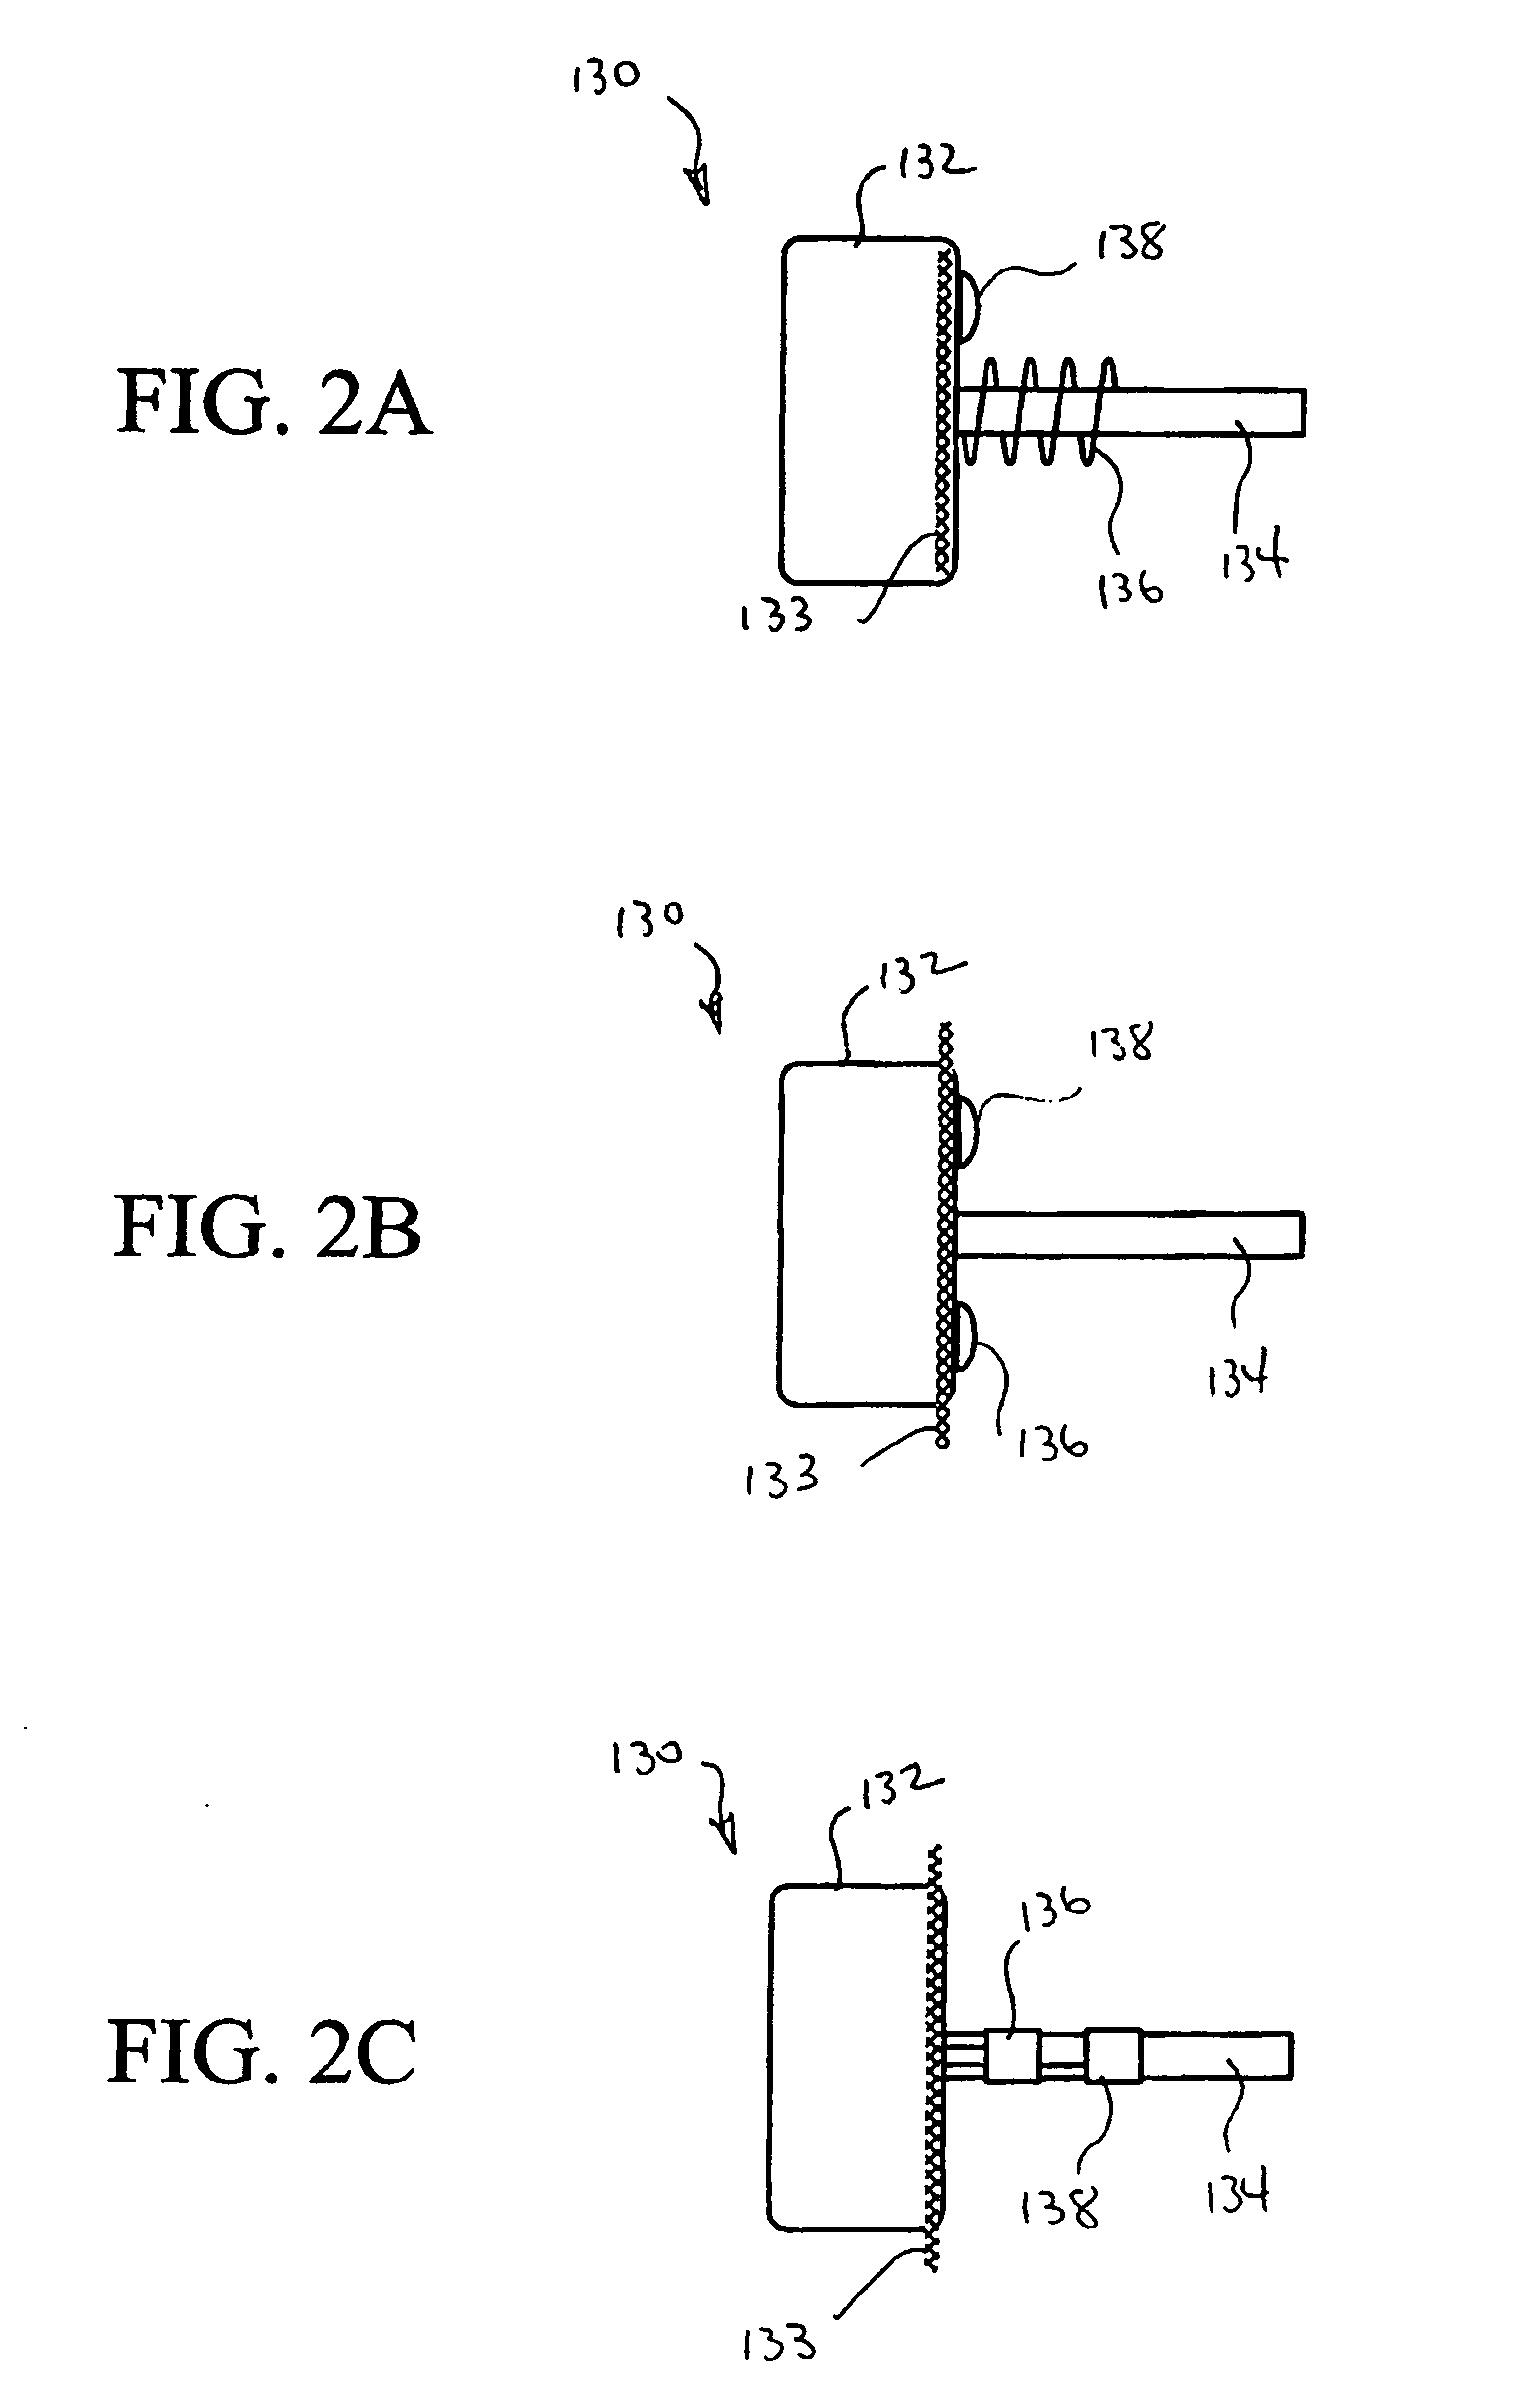 Implantable pressure sensor with pacing capability